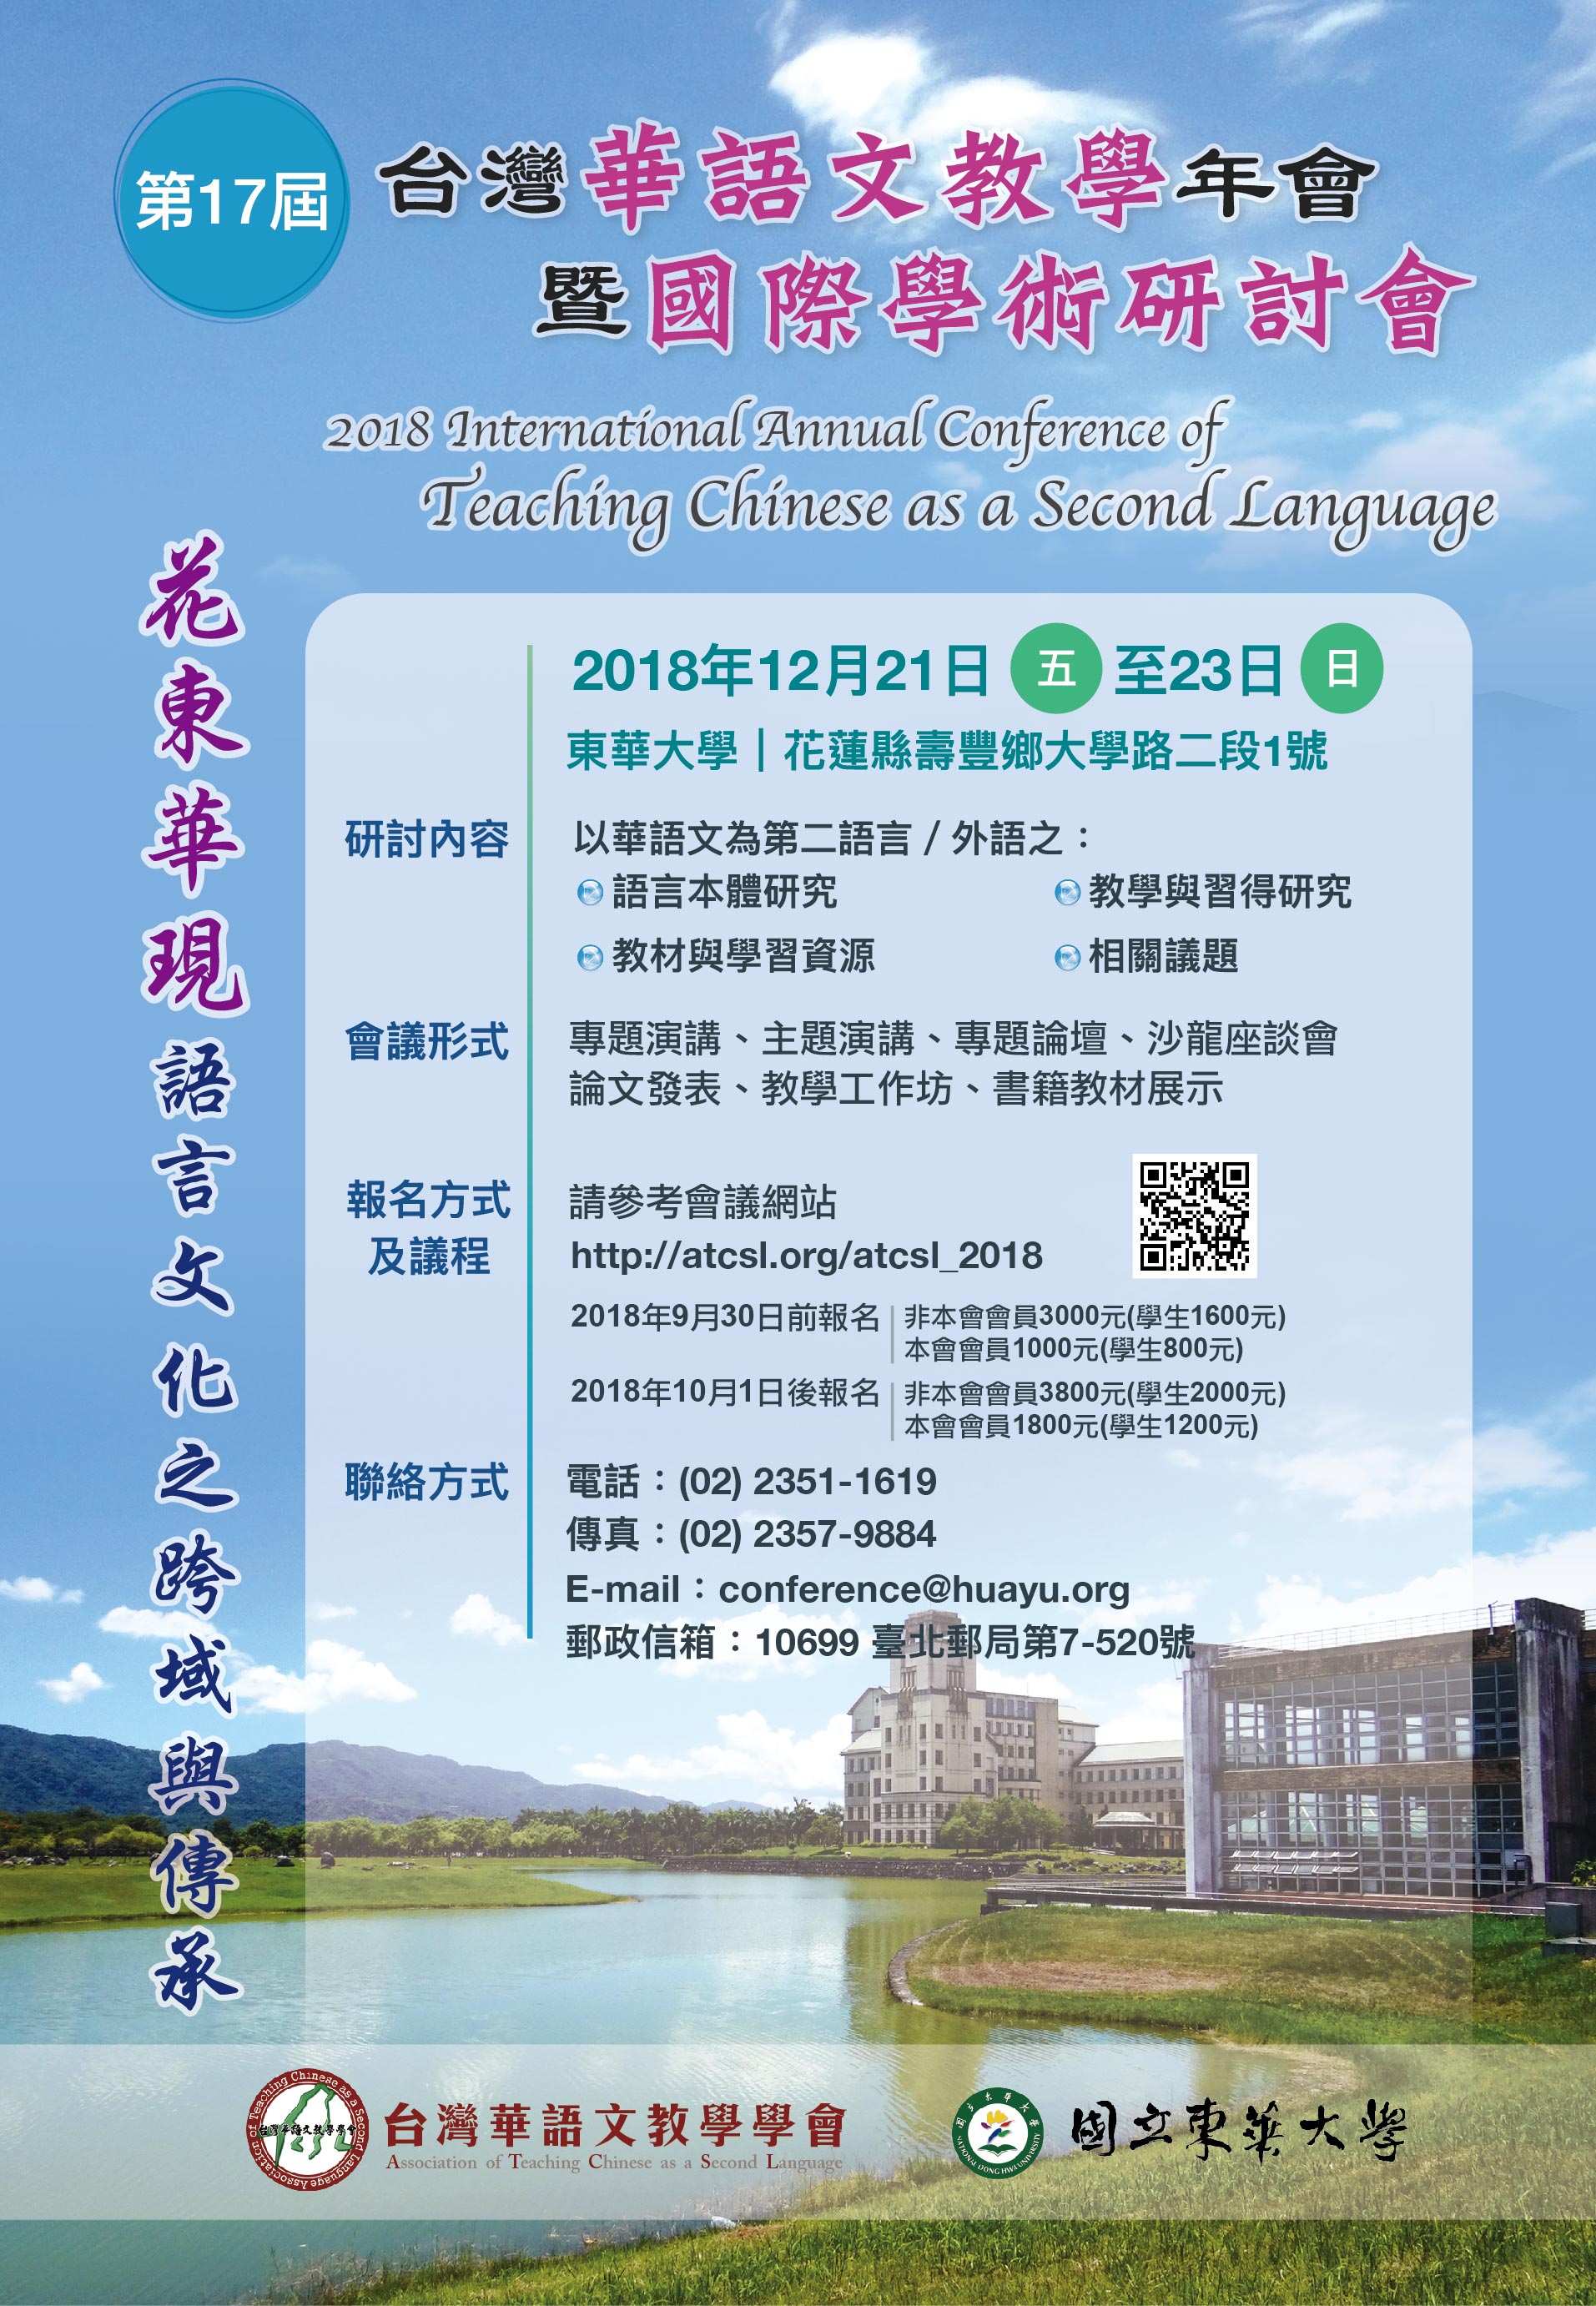 2018 International Annual Conference of Teaching Chinese as a Second Language